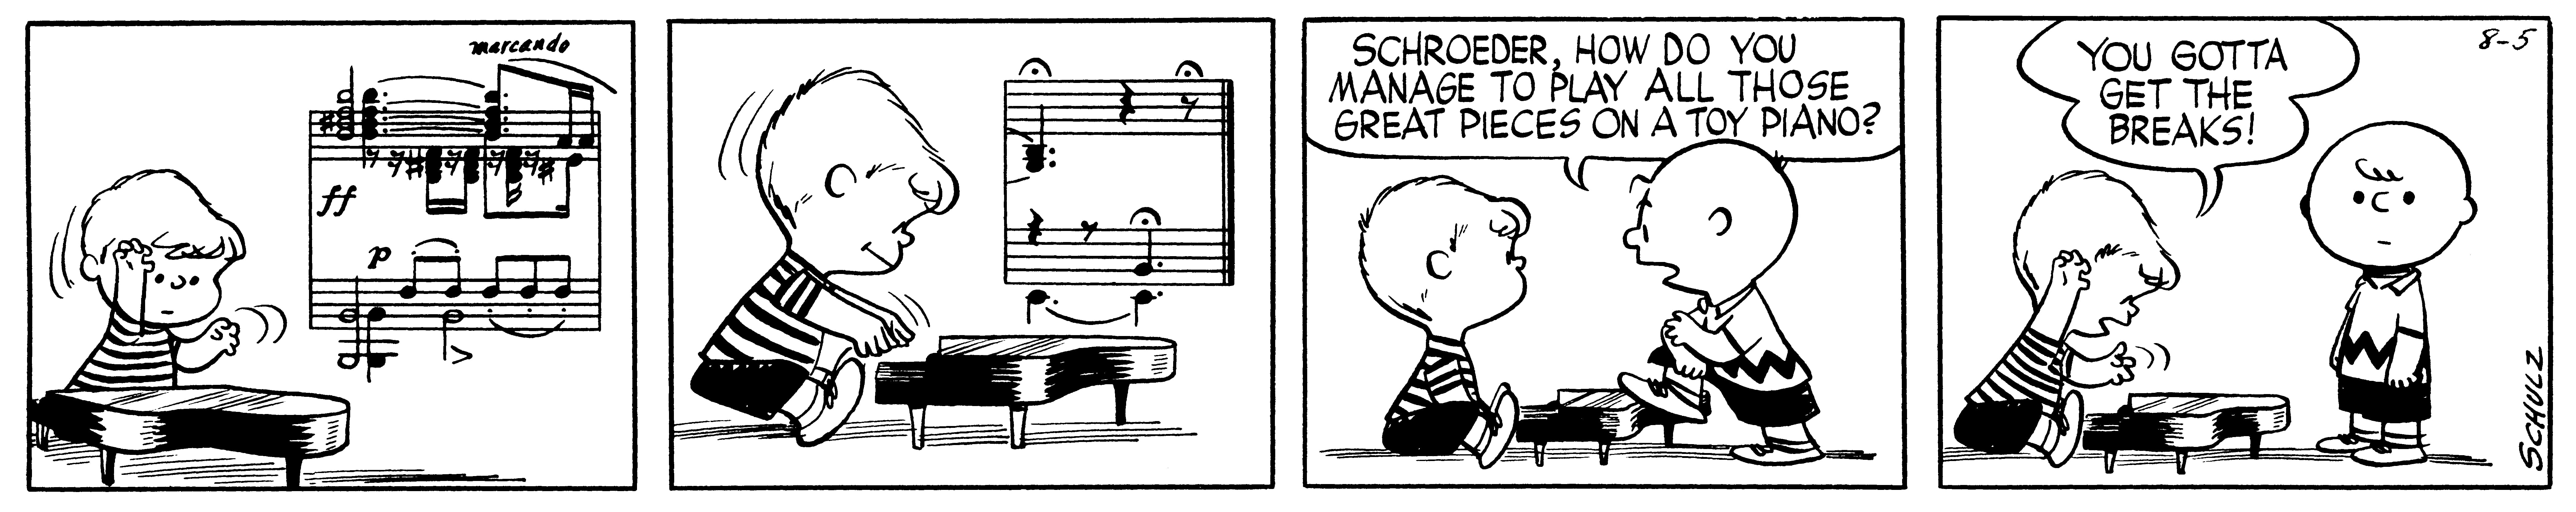 The Good Grief Of Beethoven Schroeder's Toy Piano In 'Peanuts' | Nashville Radio